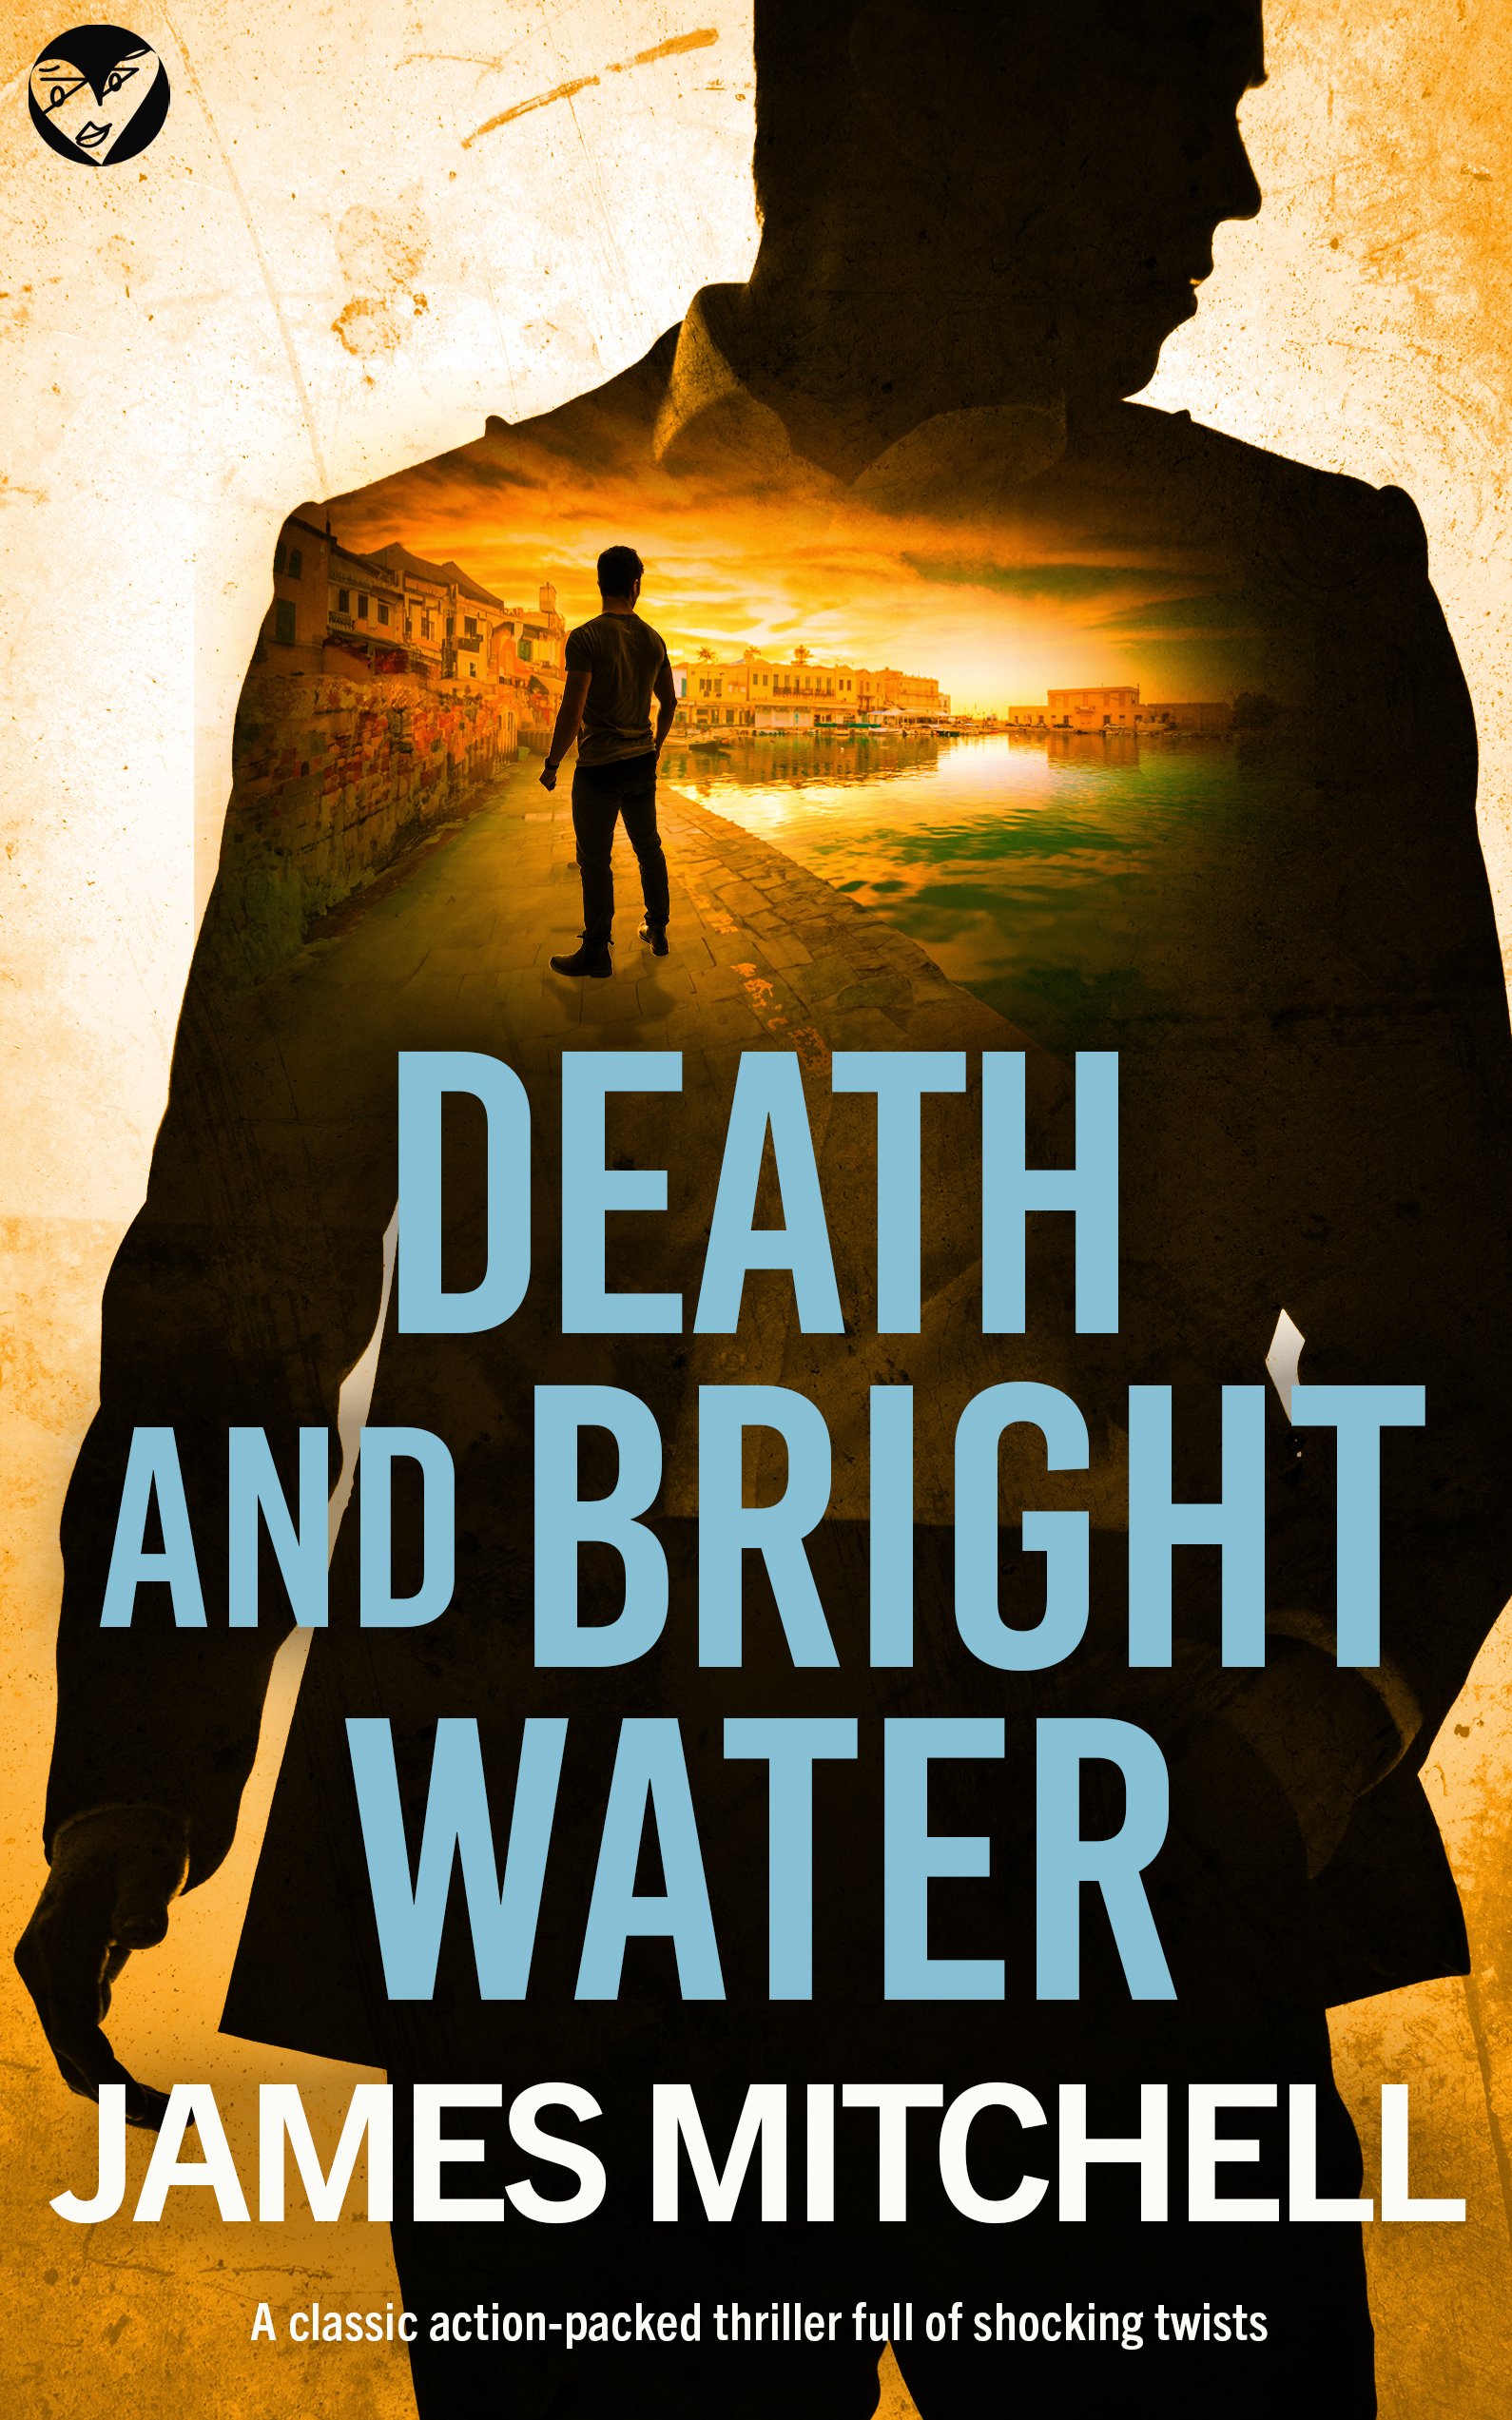 DEATH AND BRIGHT WATER Cover publish.jpg